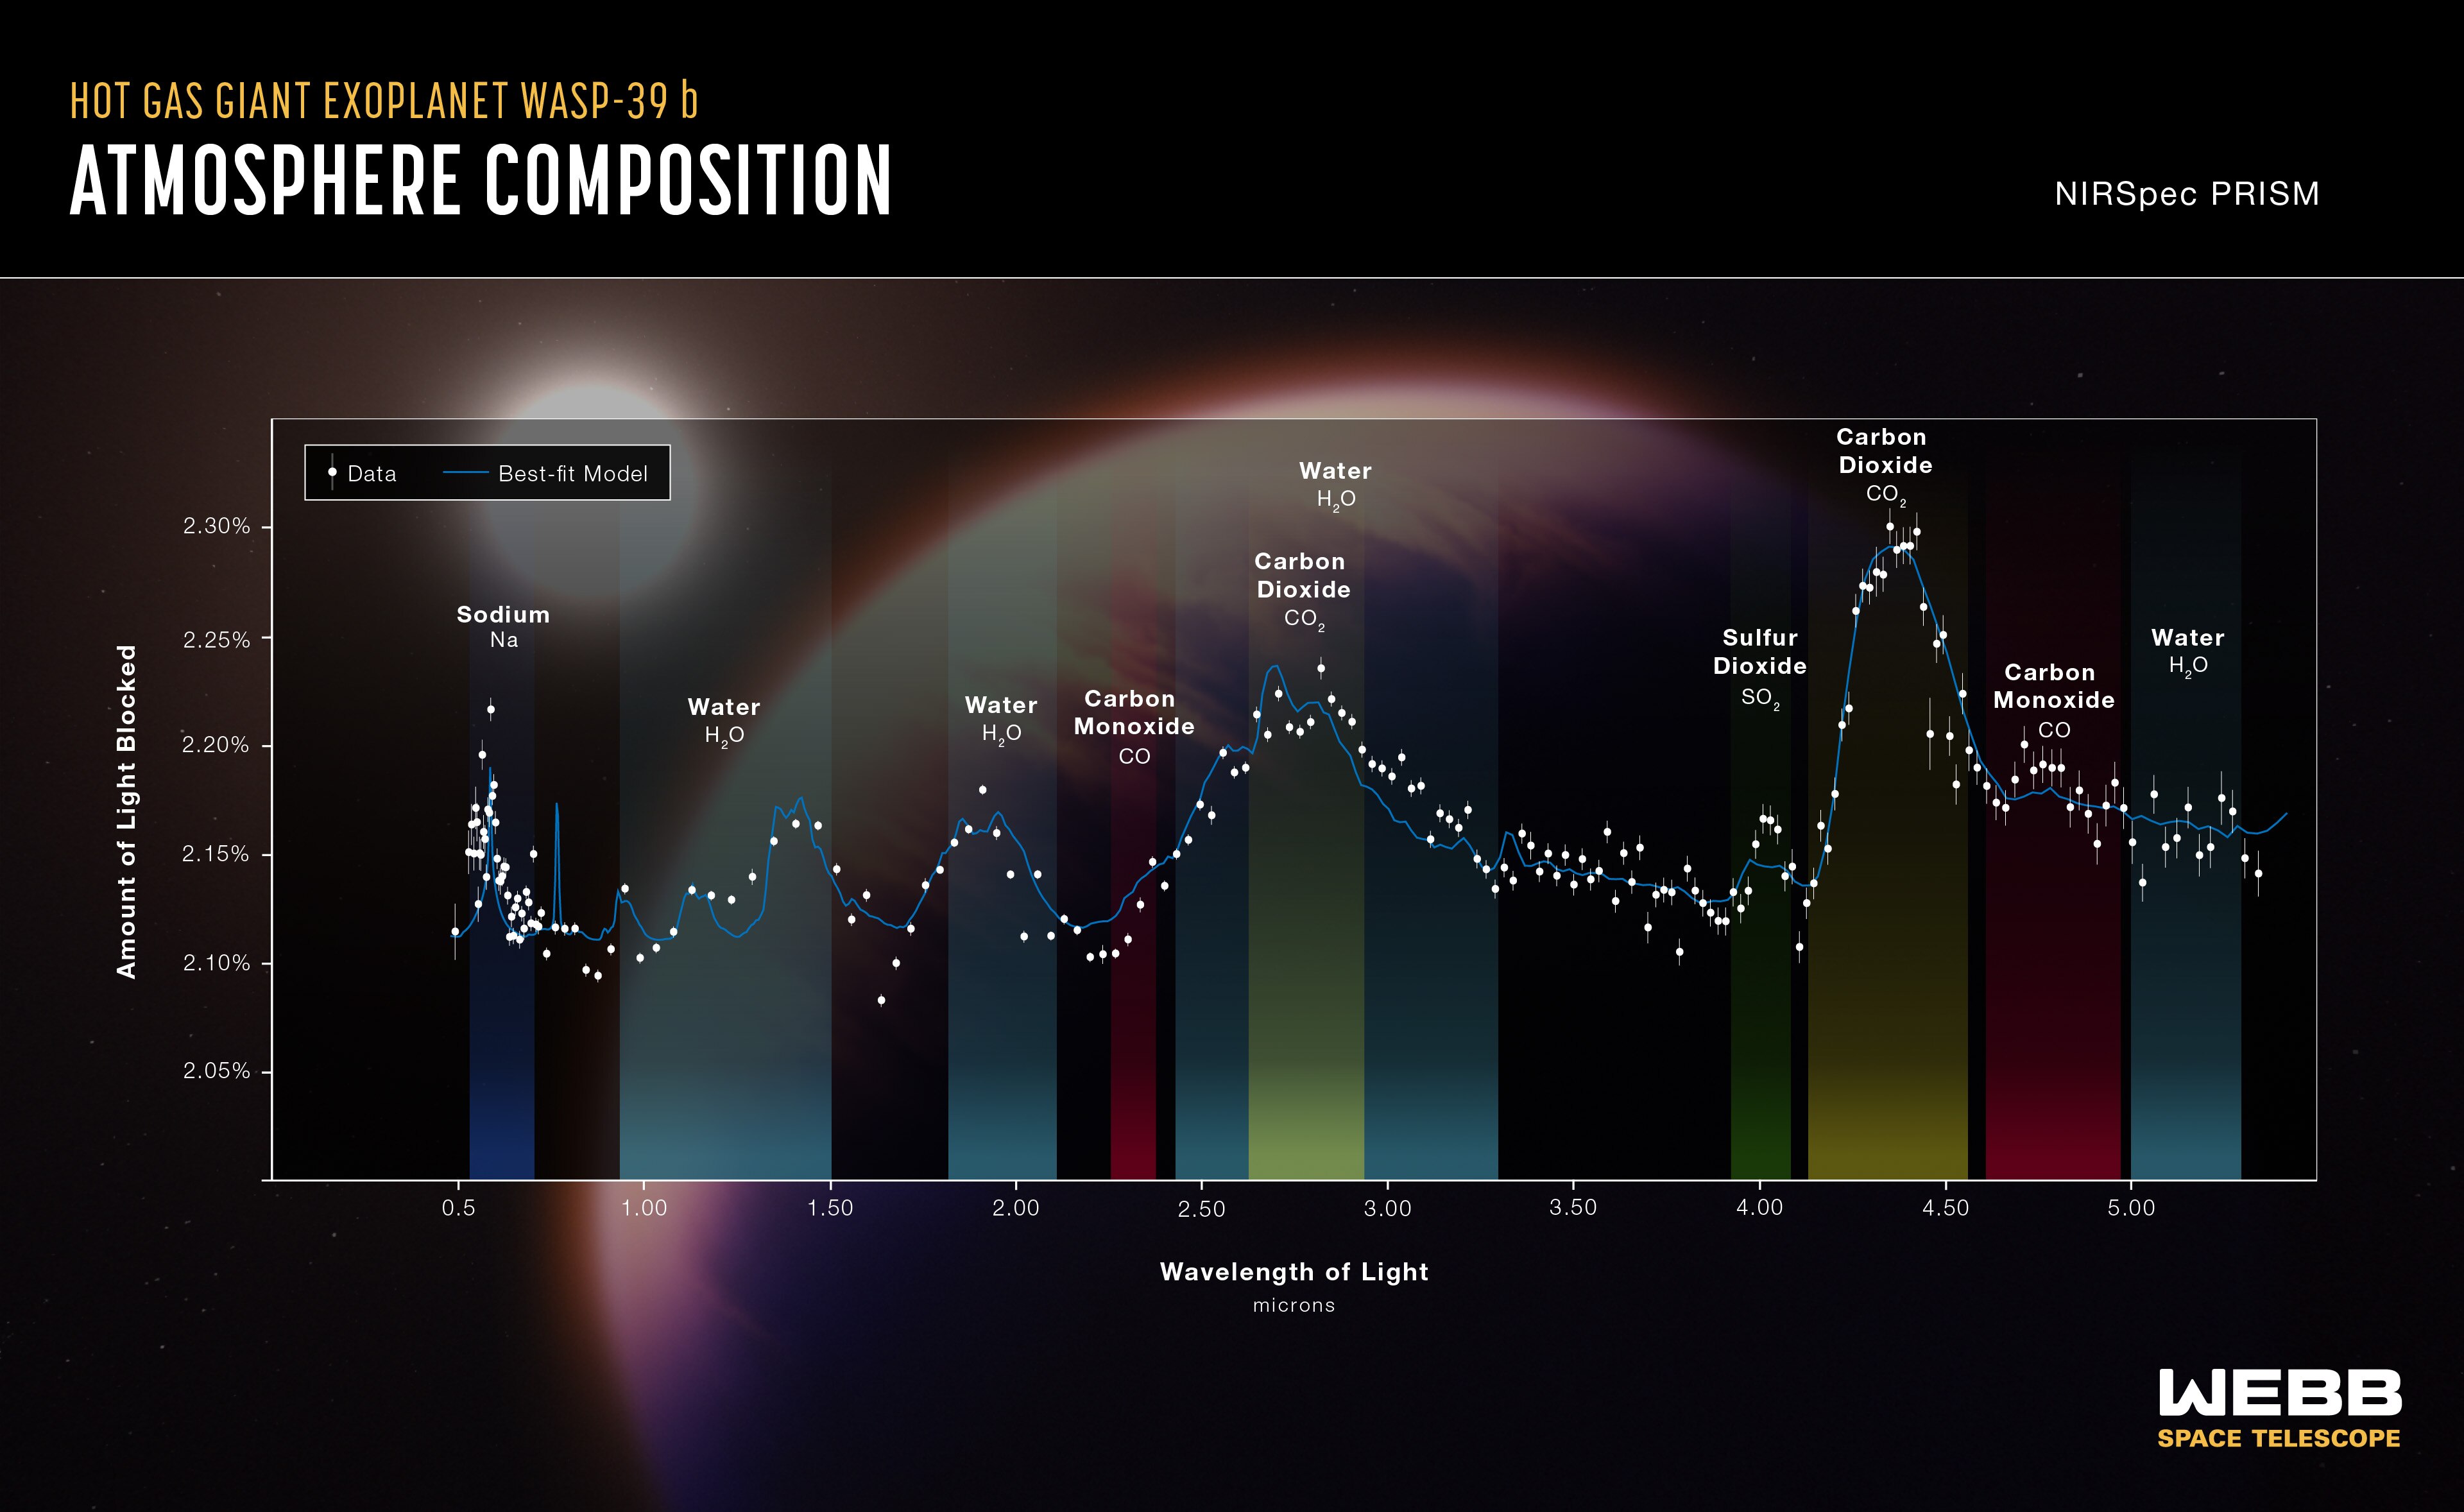 Graph showing spectra from exoplanet WASP-39b